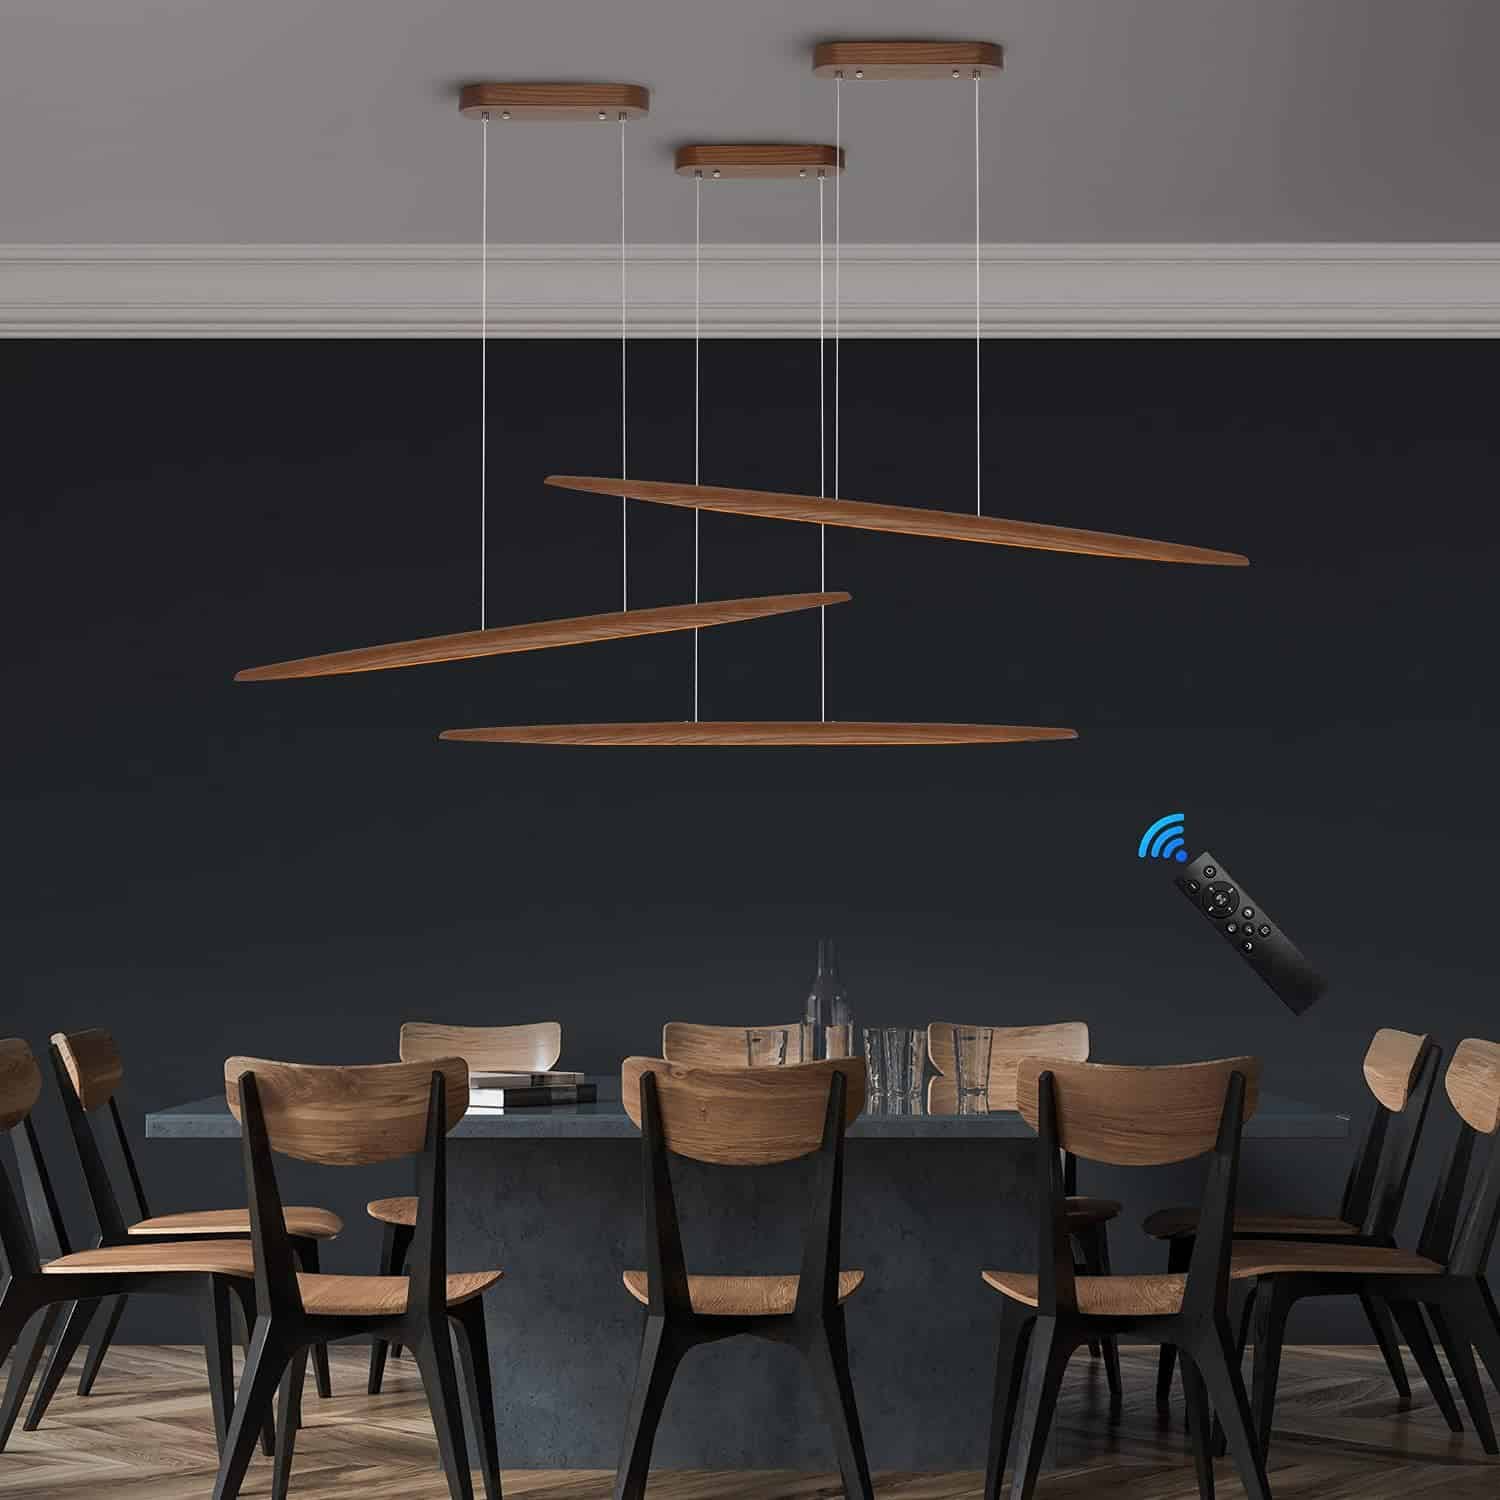 39 Wood Linear Pendant Light LED Dimmable Light Fixture Wood Linear Dinning Room Light Island Lights 24w for Dining Room Kitchen Island Pool Table Walnut Color 4